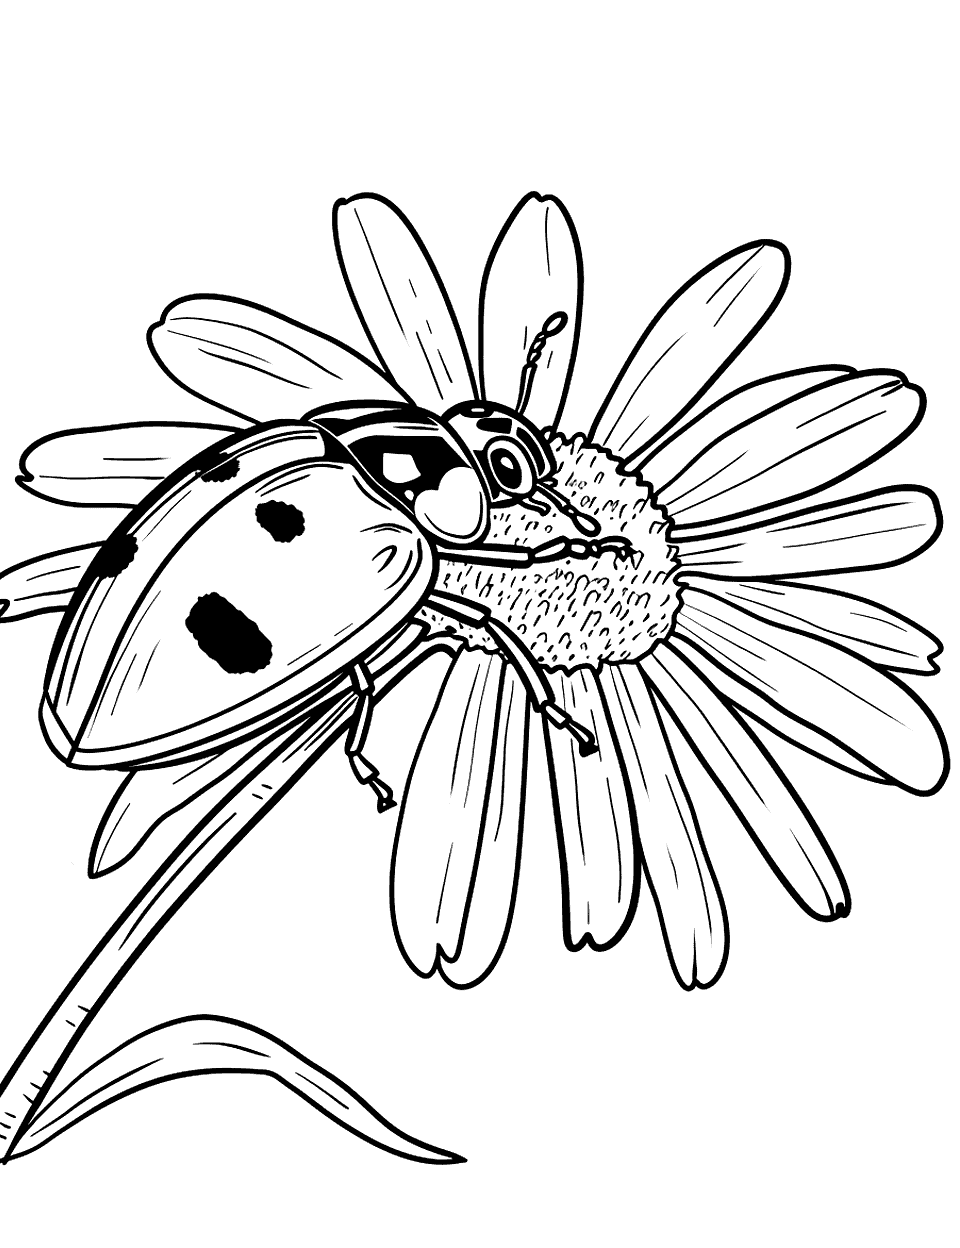 Ladybug on a Daisy Insect Coloring Page - A ladybug resting on a daisy flower.